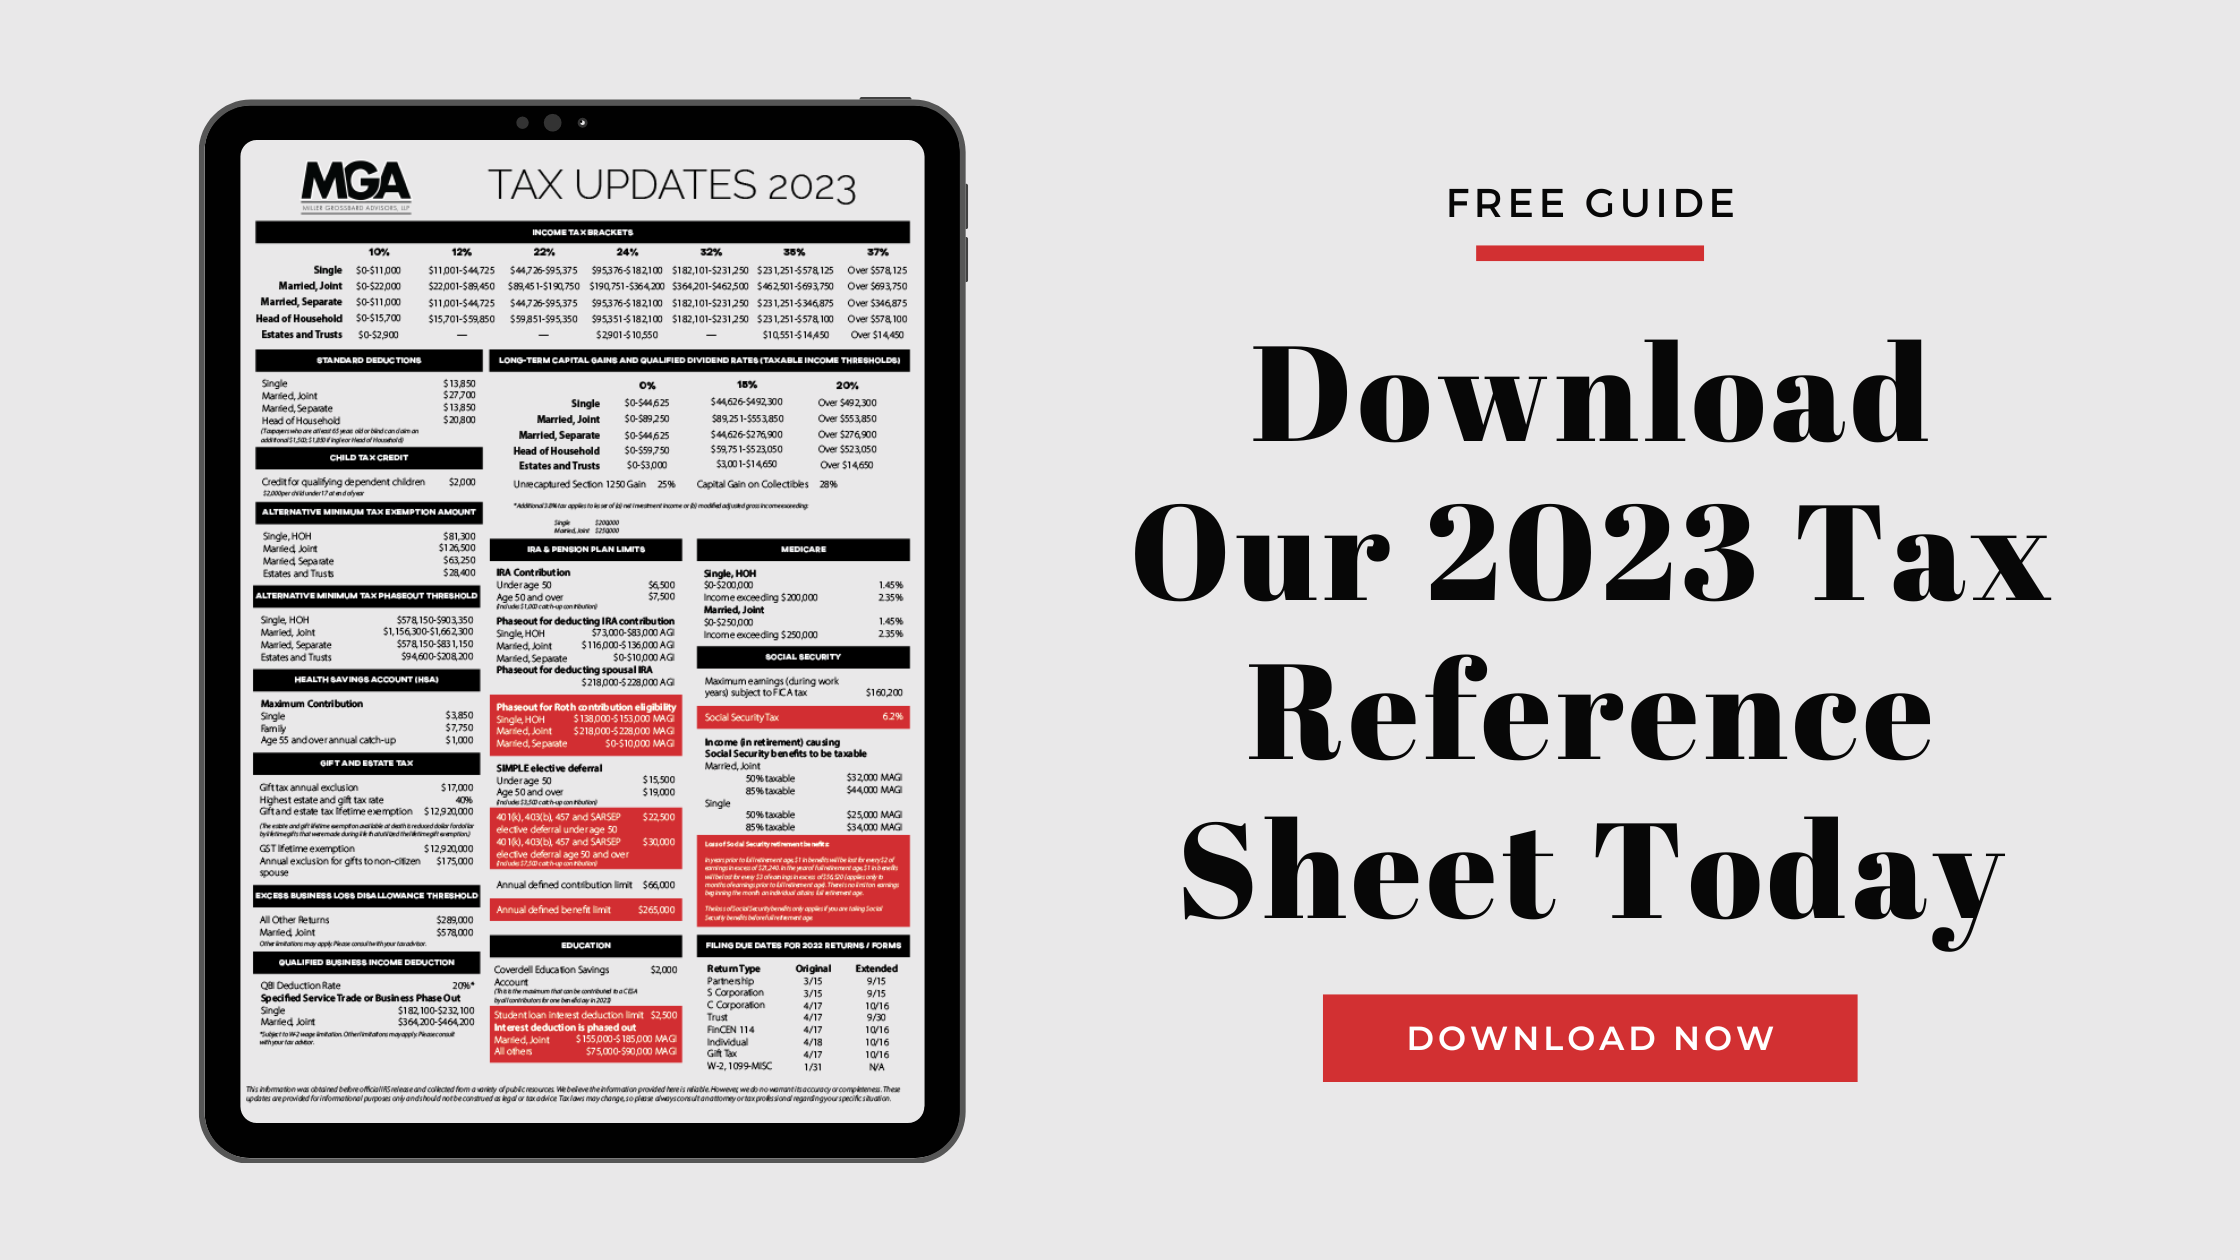 Need a Quick Reference Guide for 2023 Federal Taxes? We’ve Got You Covered